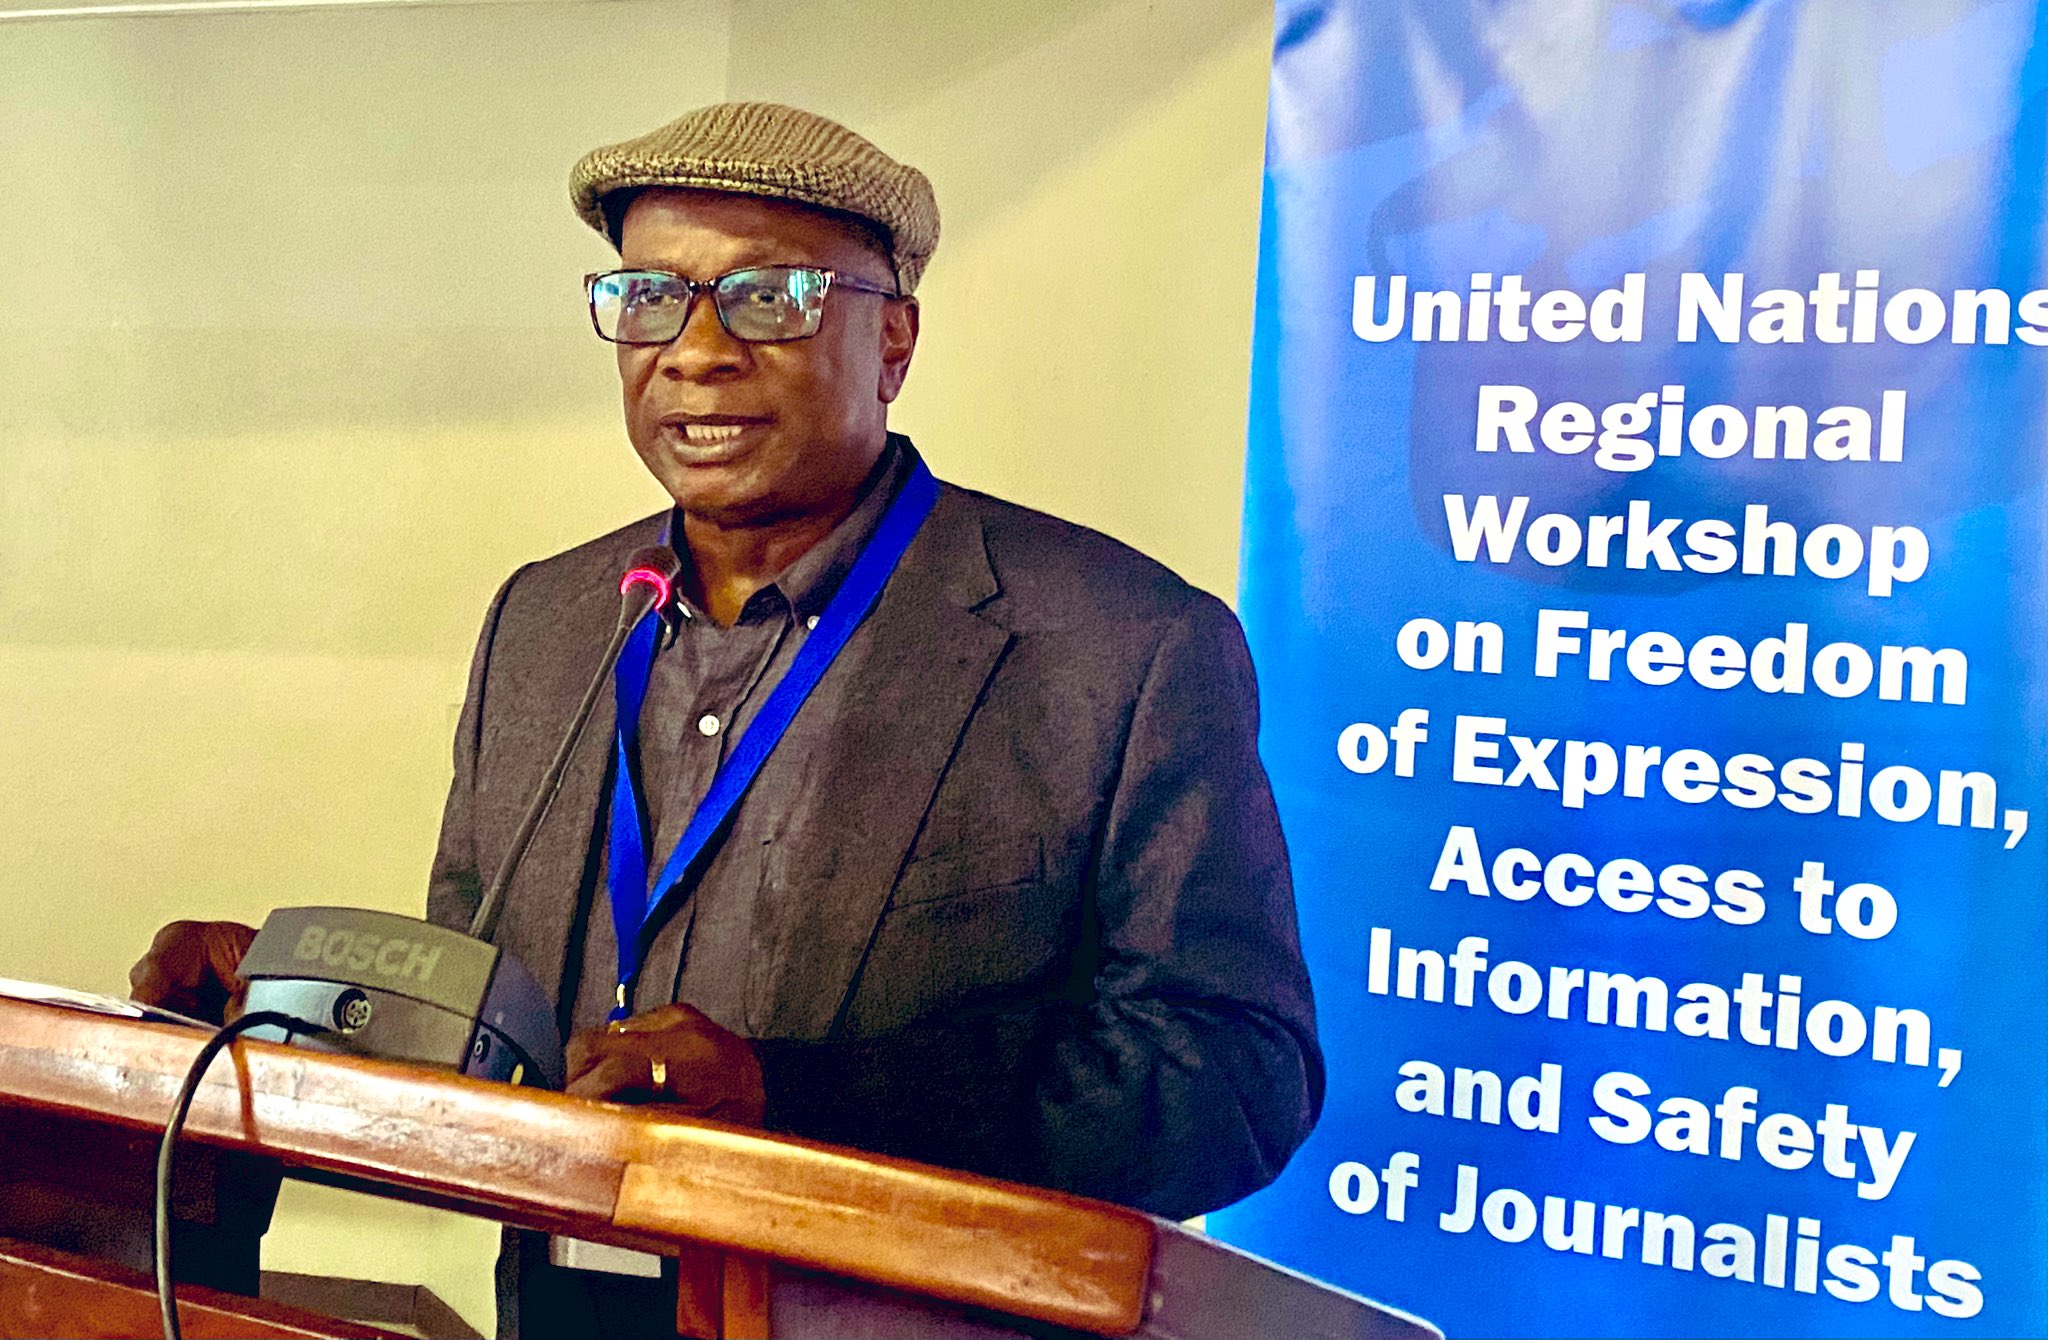 Freedom of Expression, Information and Safety of Journalists Sacrosanct: UN